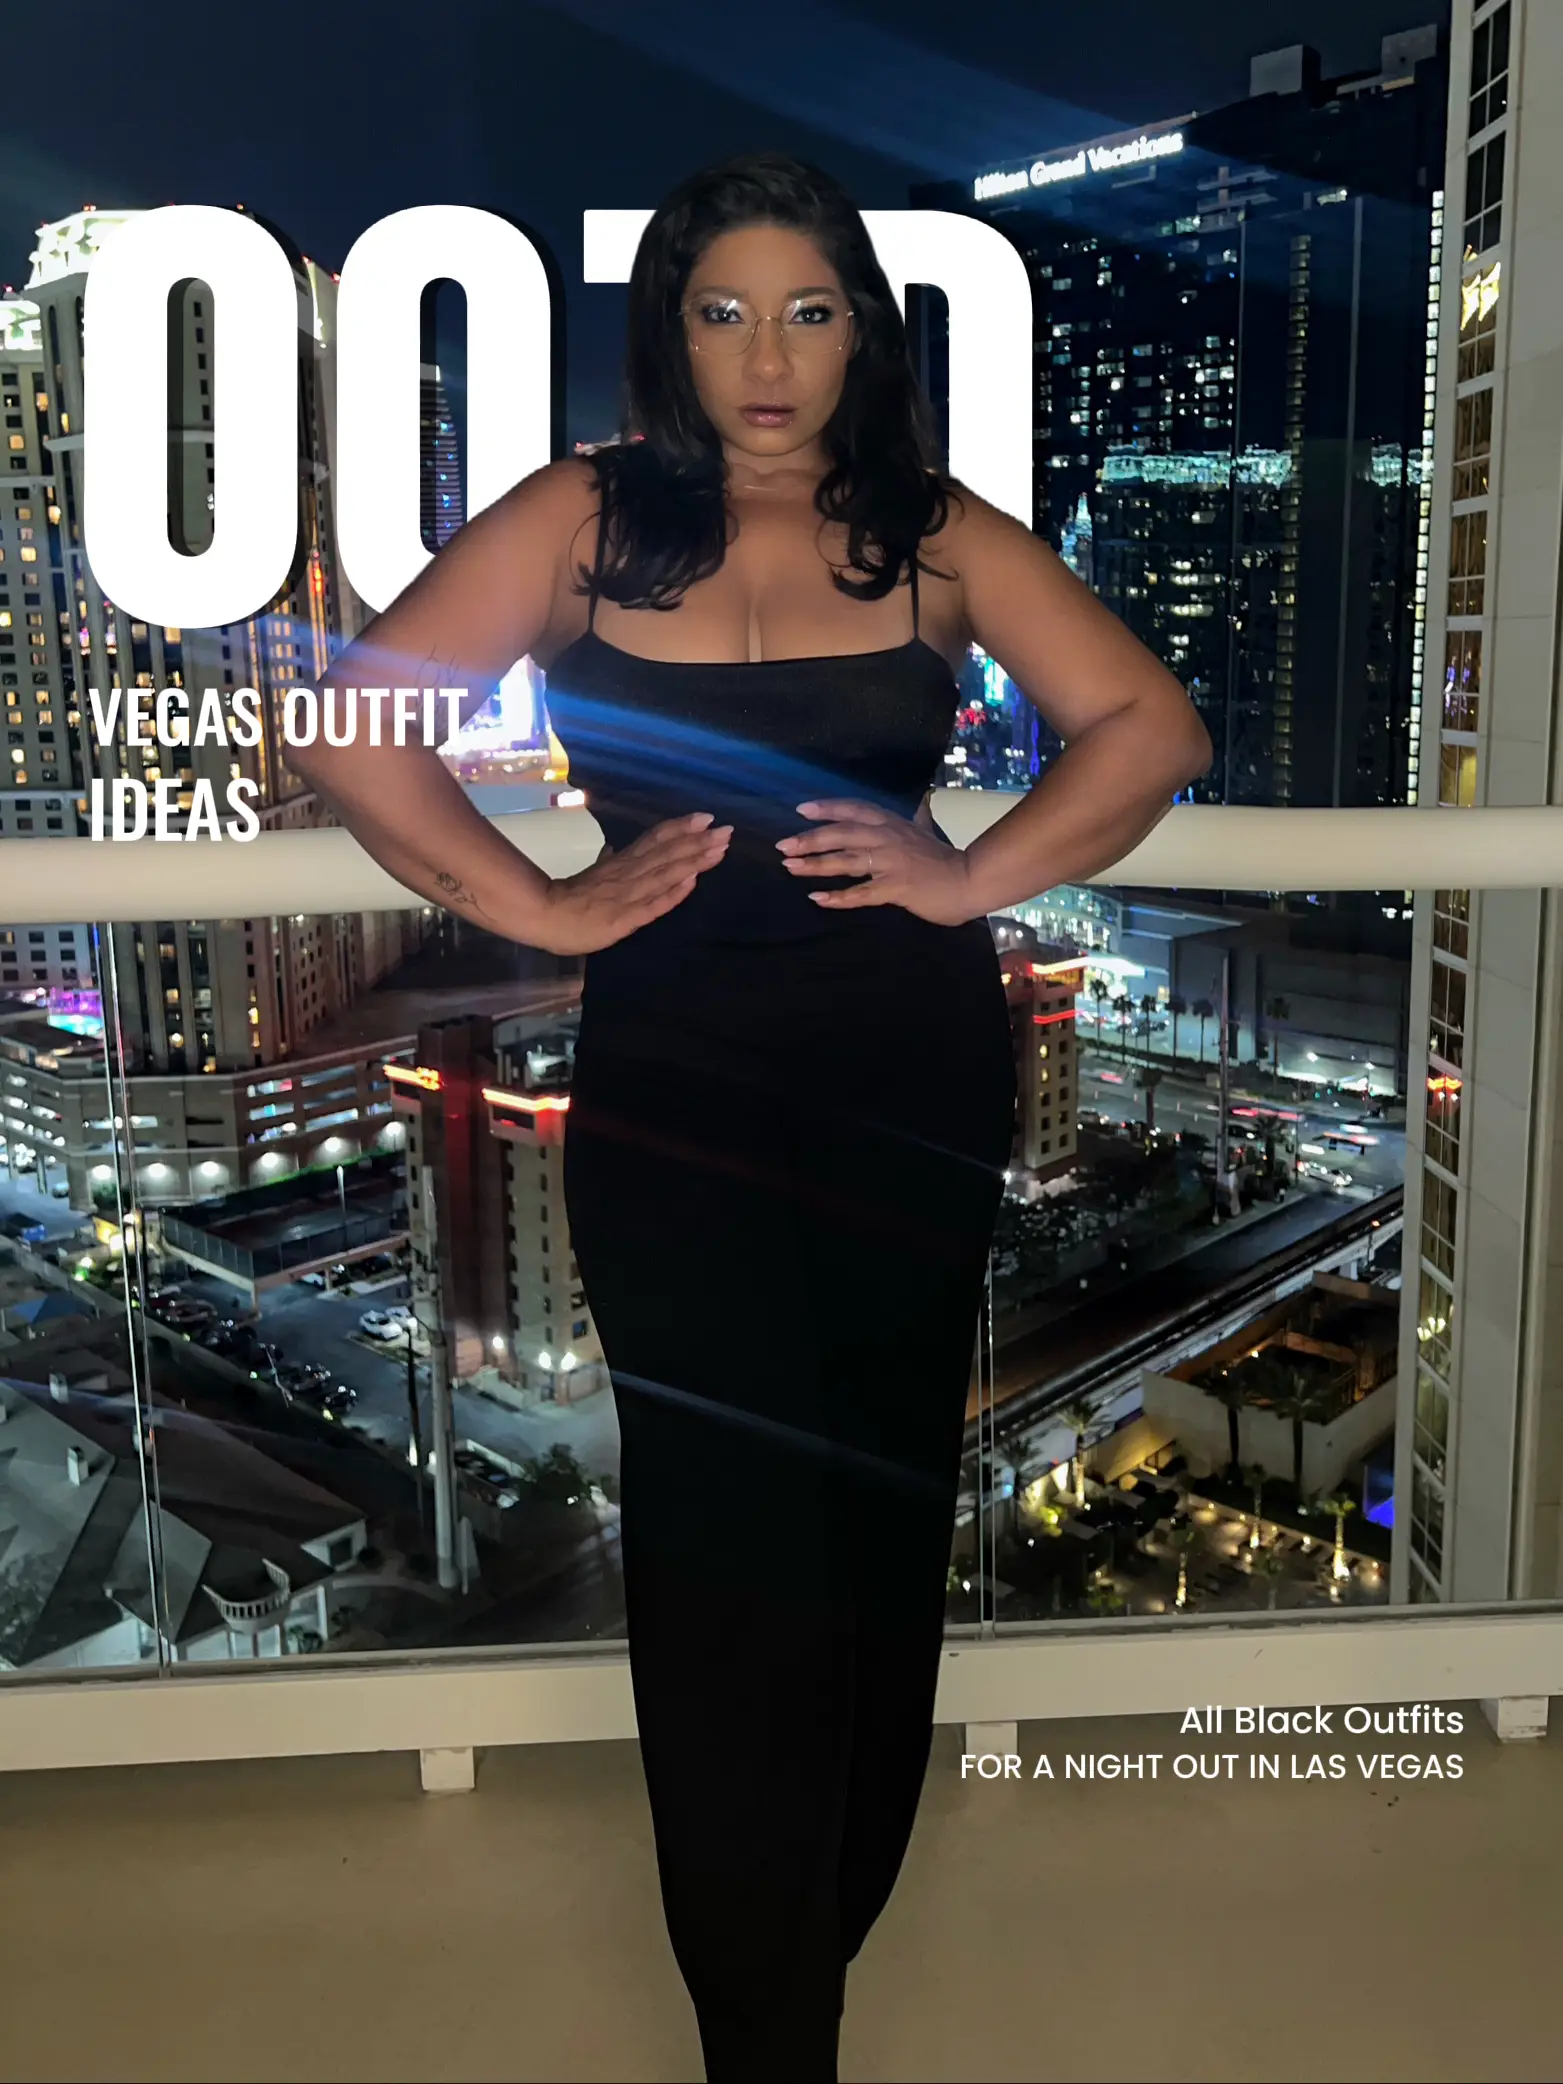 All Black Las Vegas Outfits  Gallery posted by Lepetitdejanae